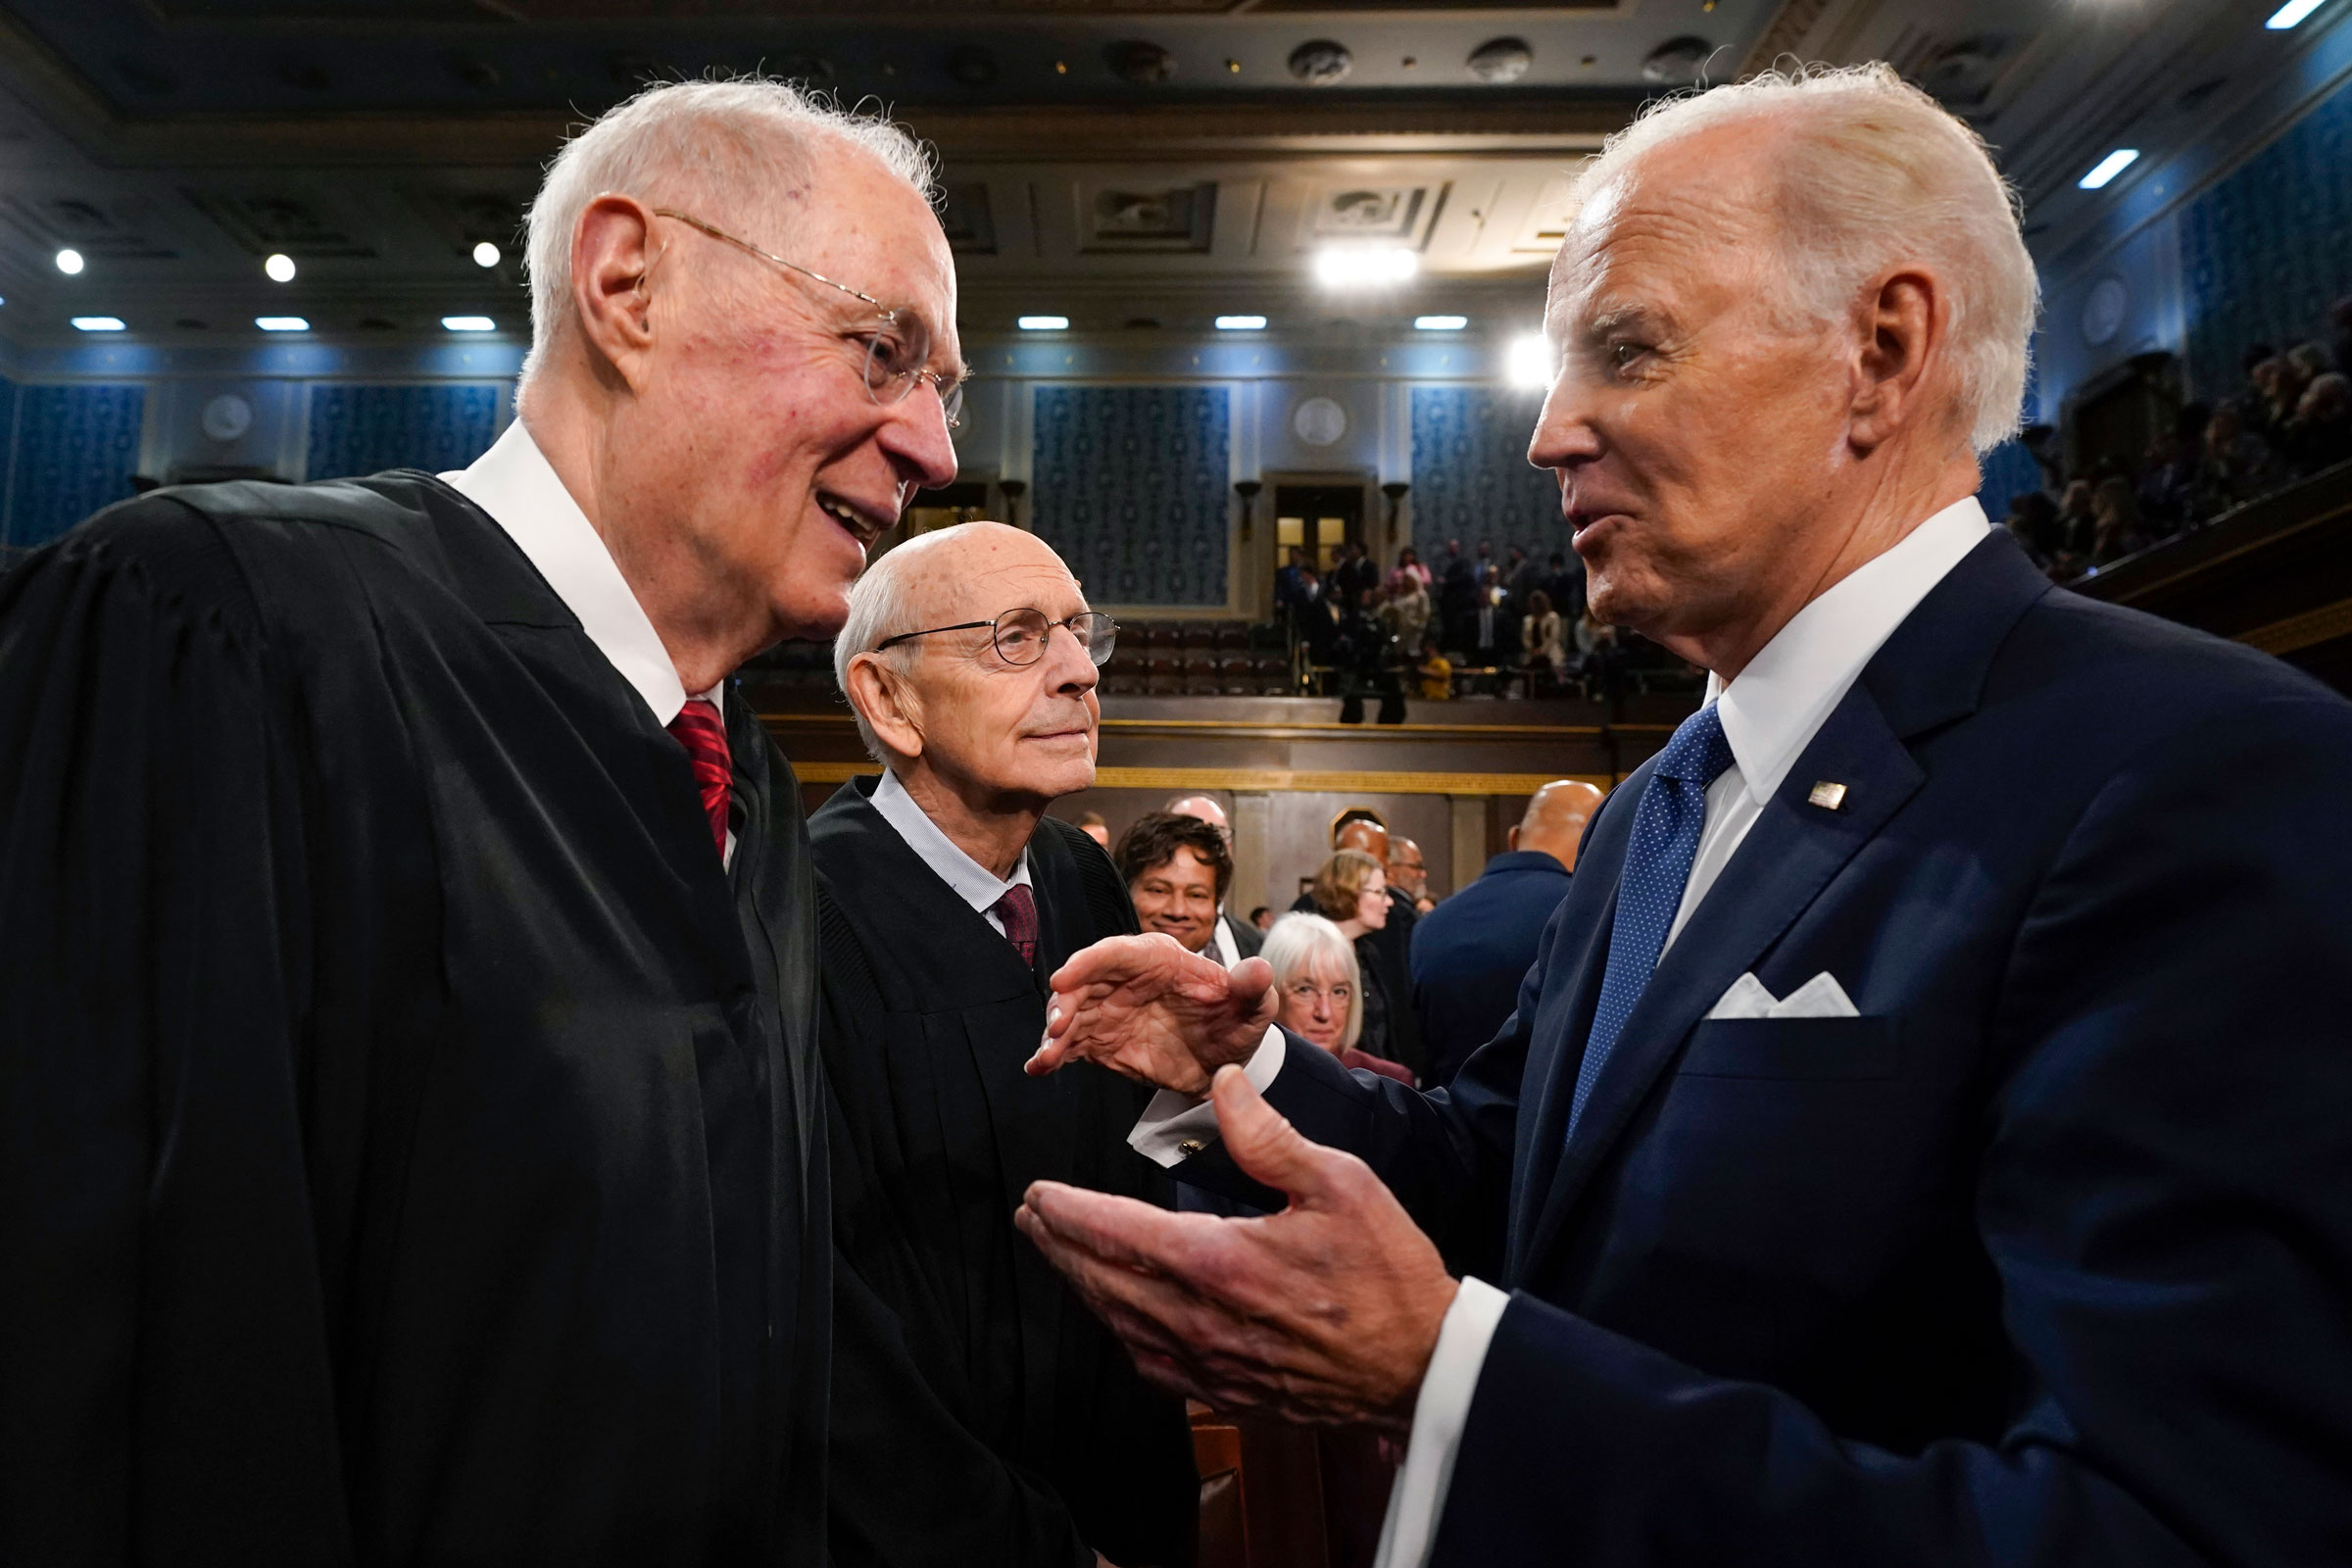 President Joe Biden talks with retired Supreme Court Justice Anthony Kennedy after delivering the State of the Union address on Feb. 7, 2023. (Jacquelyn Martin—Pool/Getty Images)